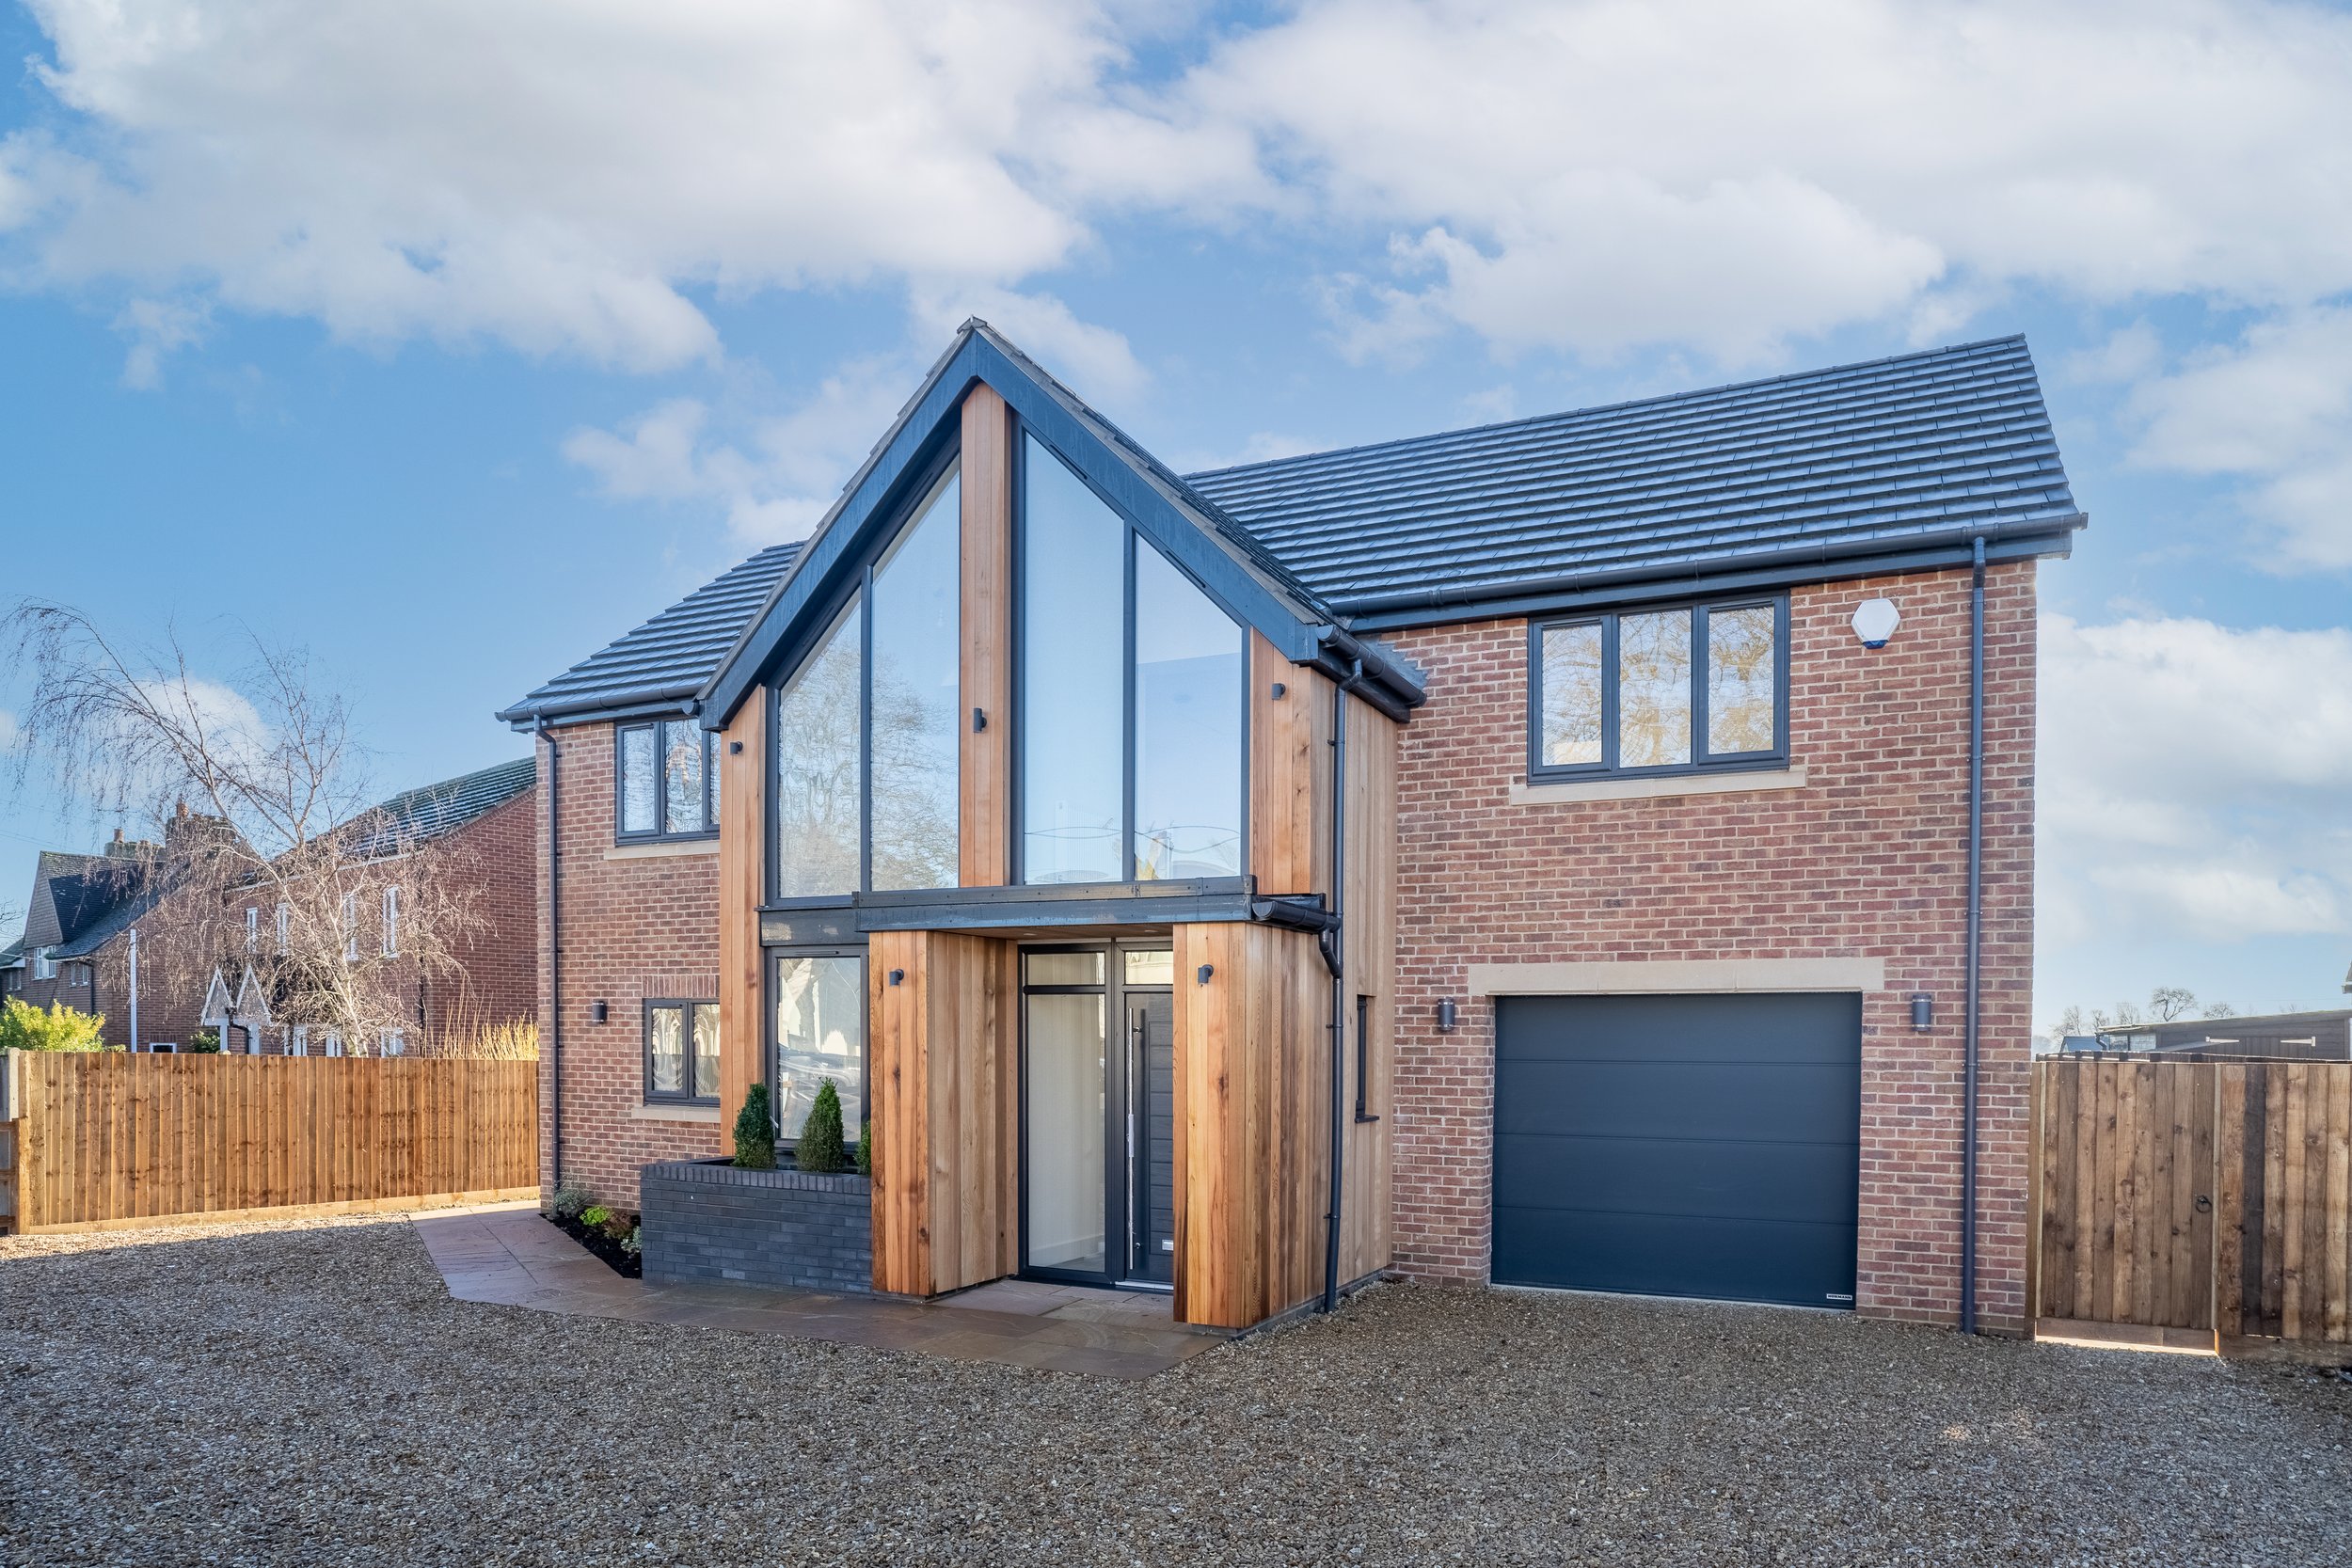 Greenfields - completed new bespoke 5 bedroom executive home, Wilburton, Cambridgeshire.